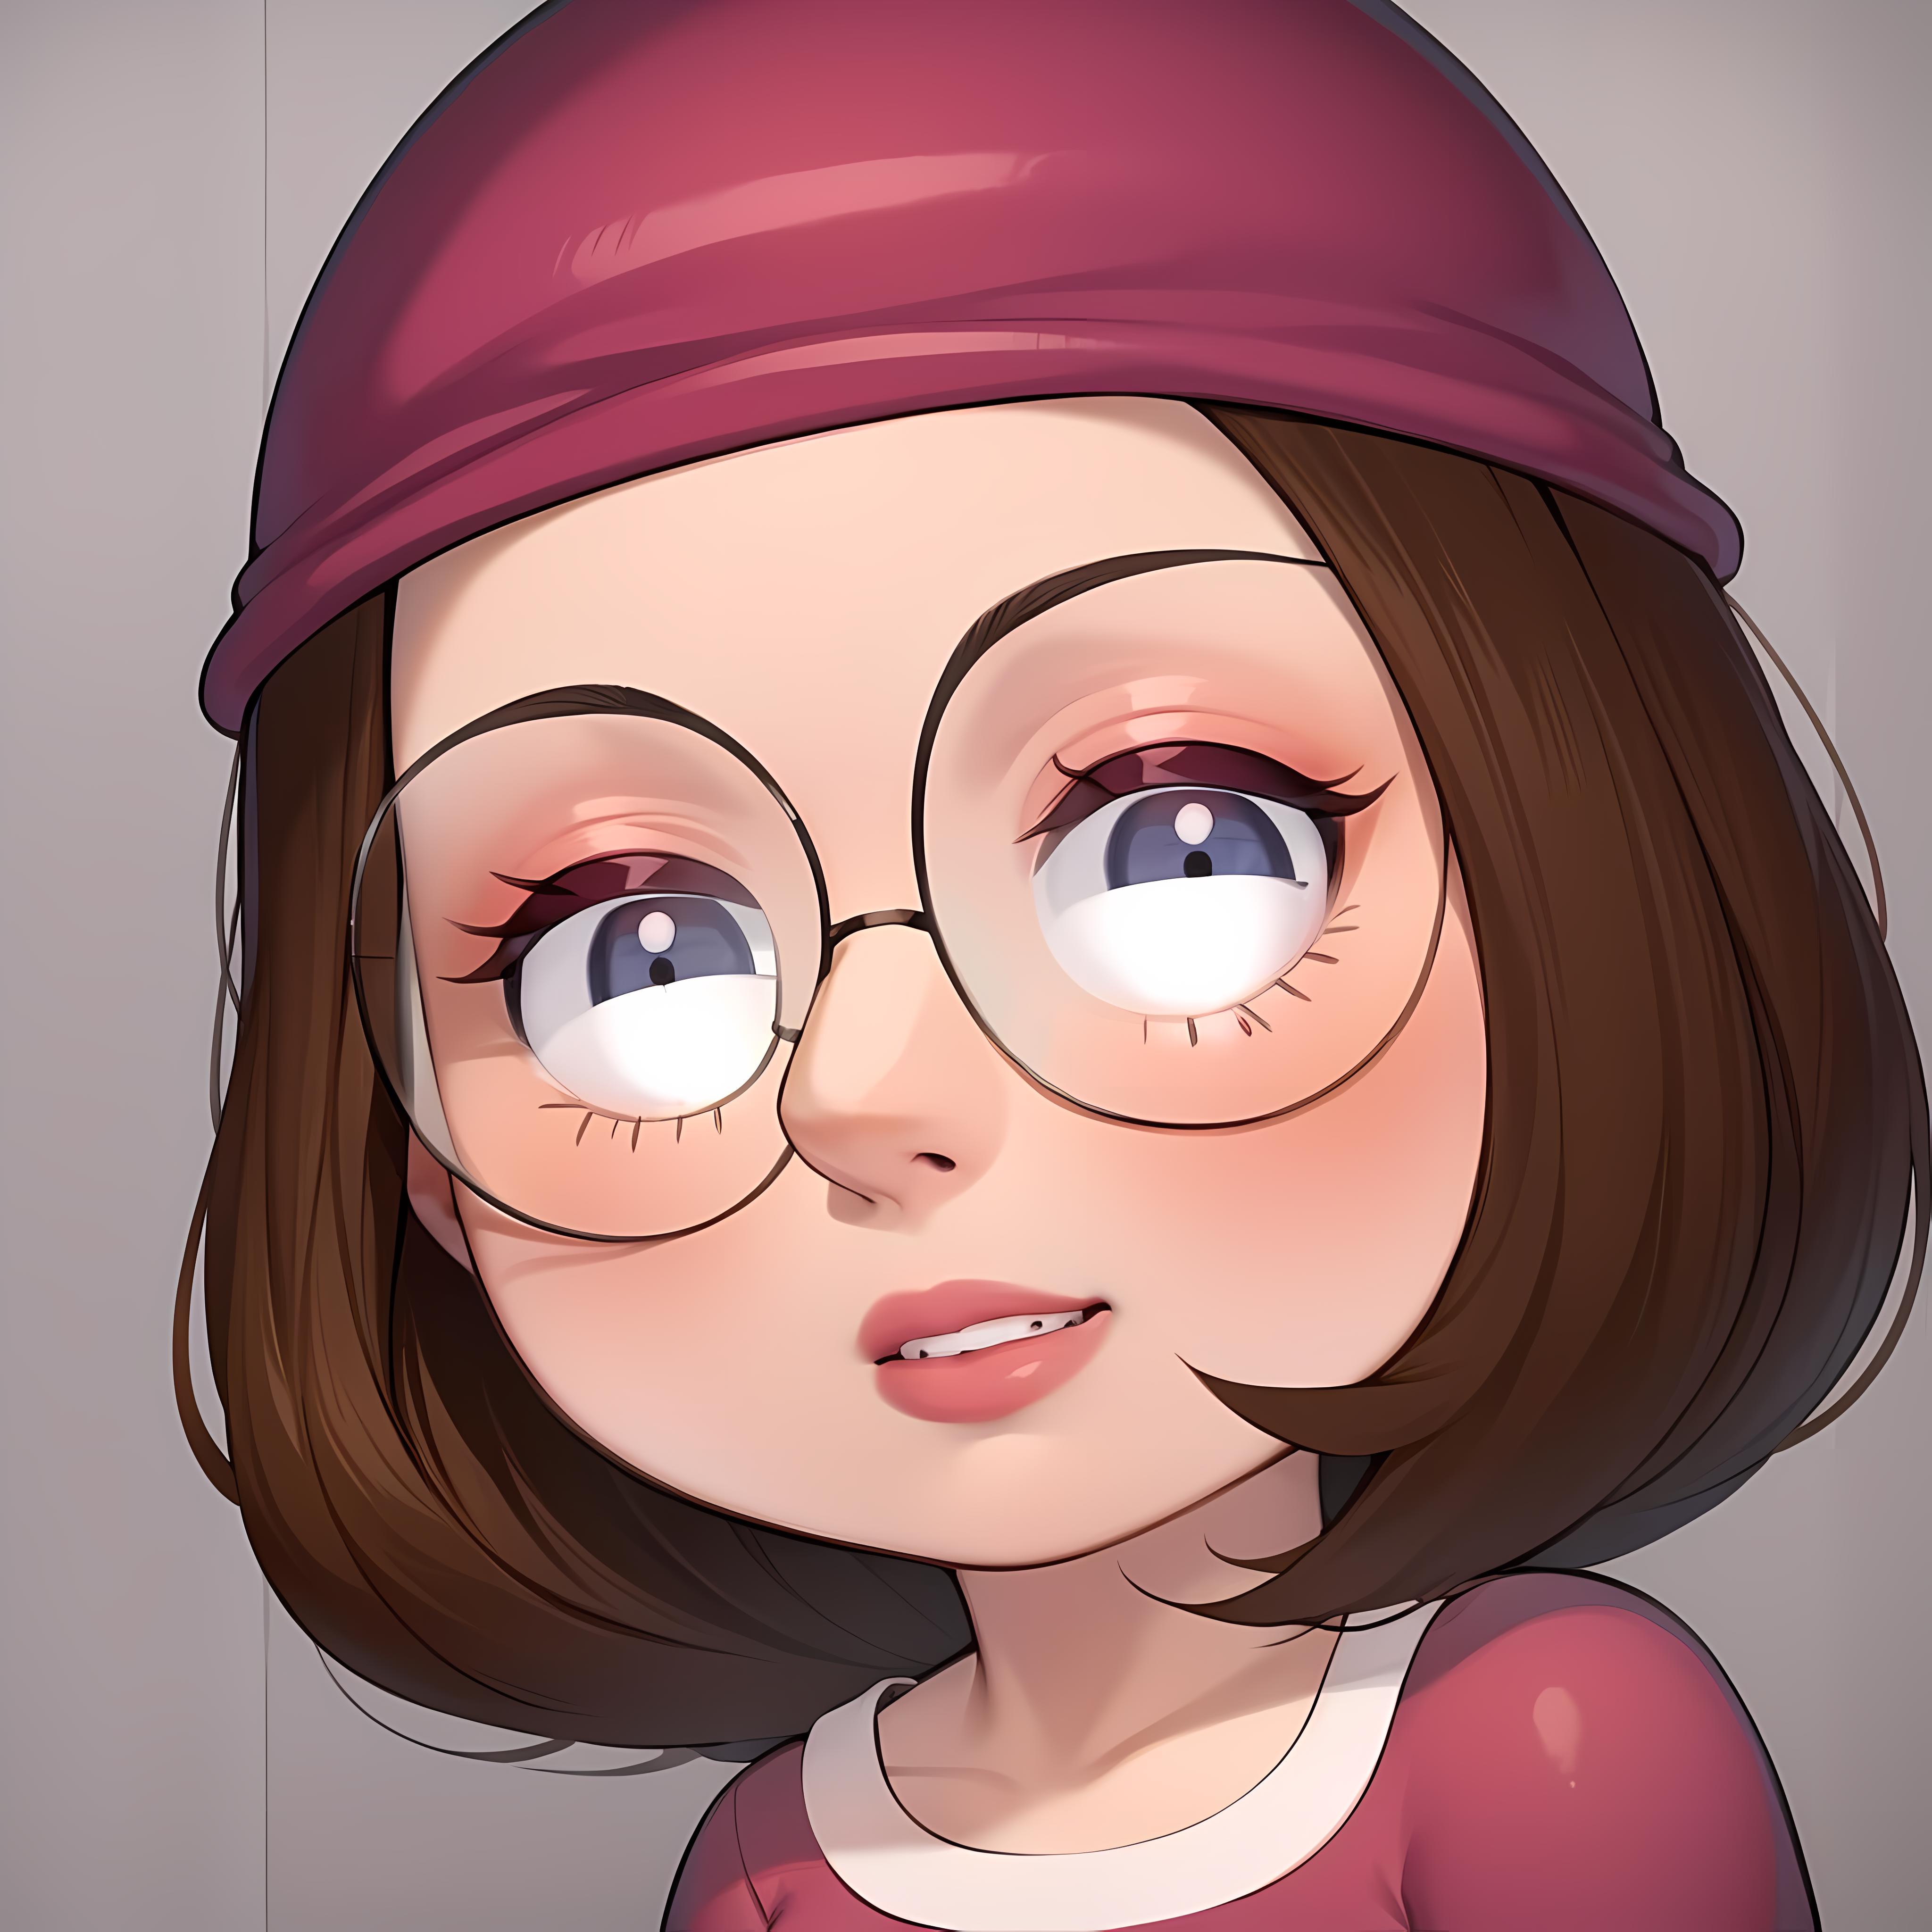 Meg griffin image by TheGooder